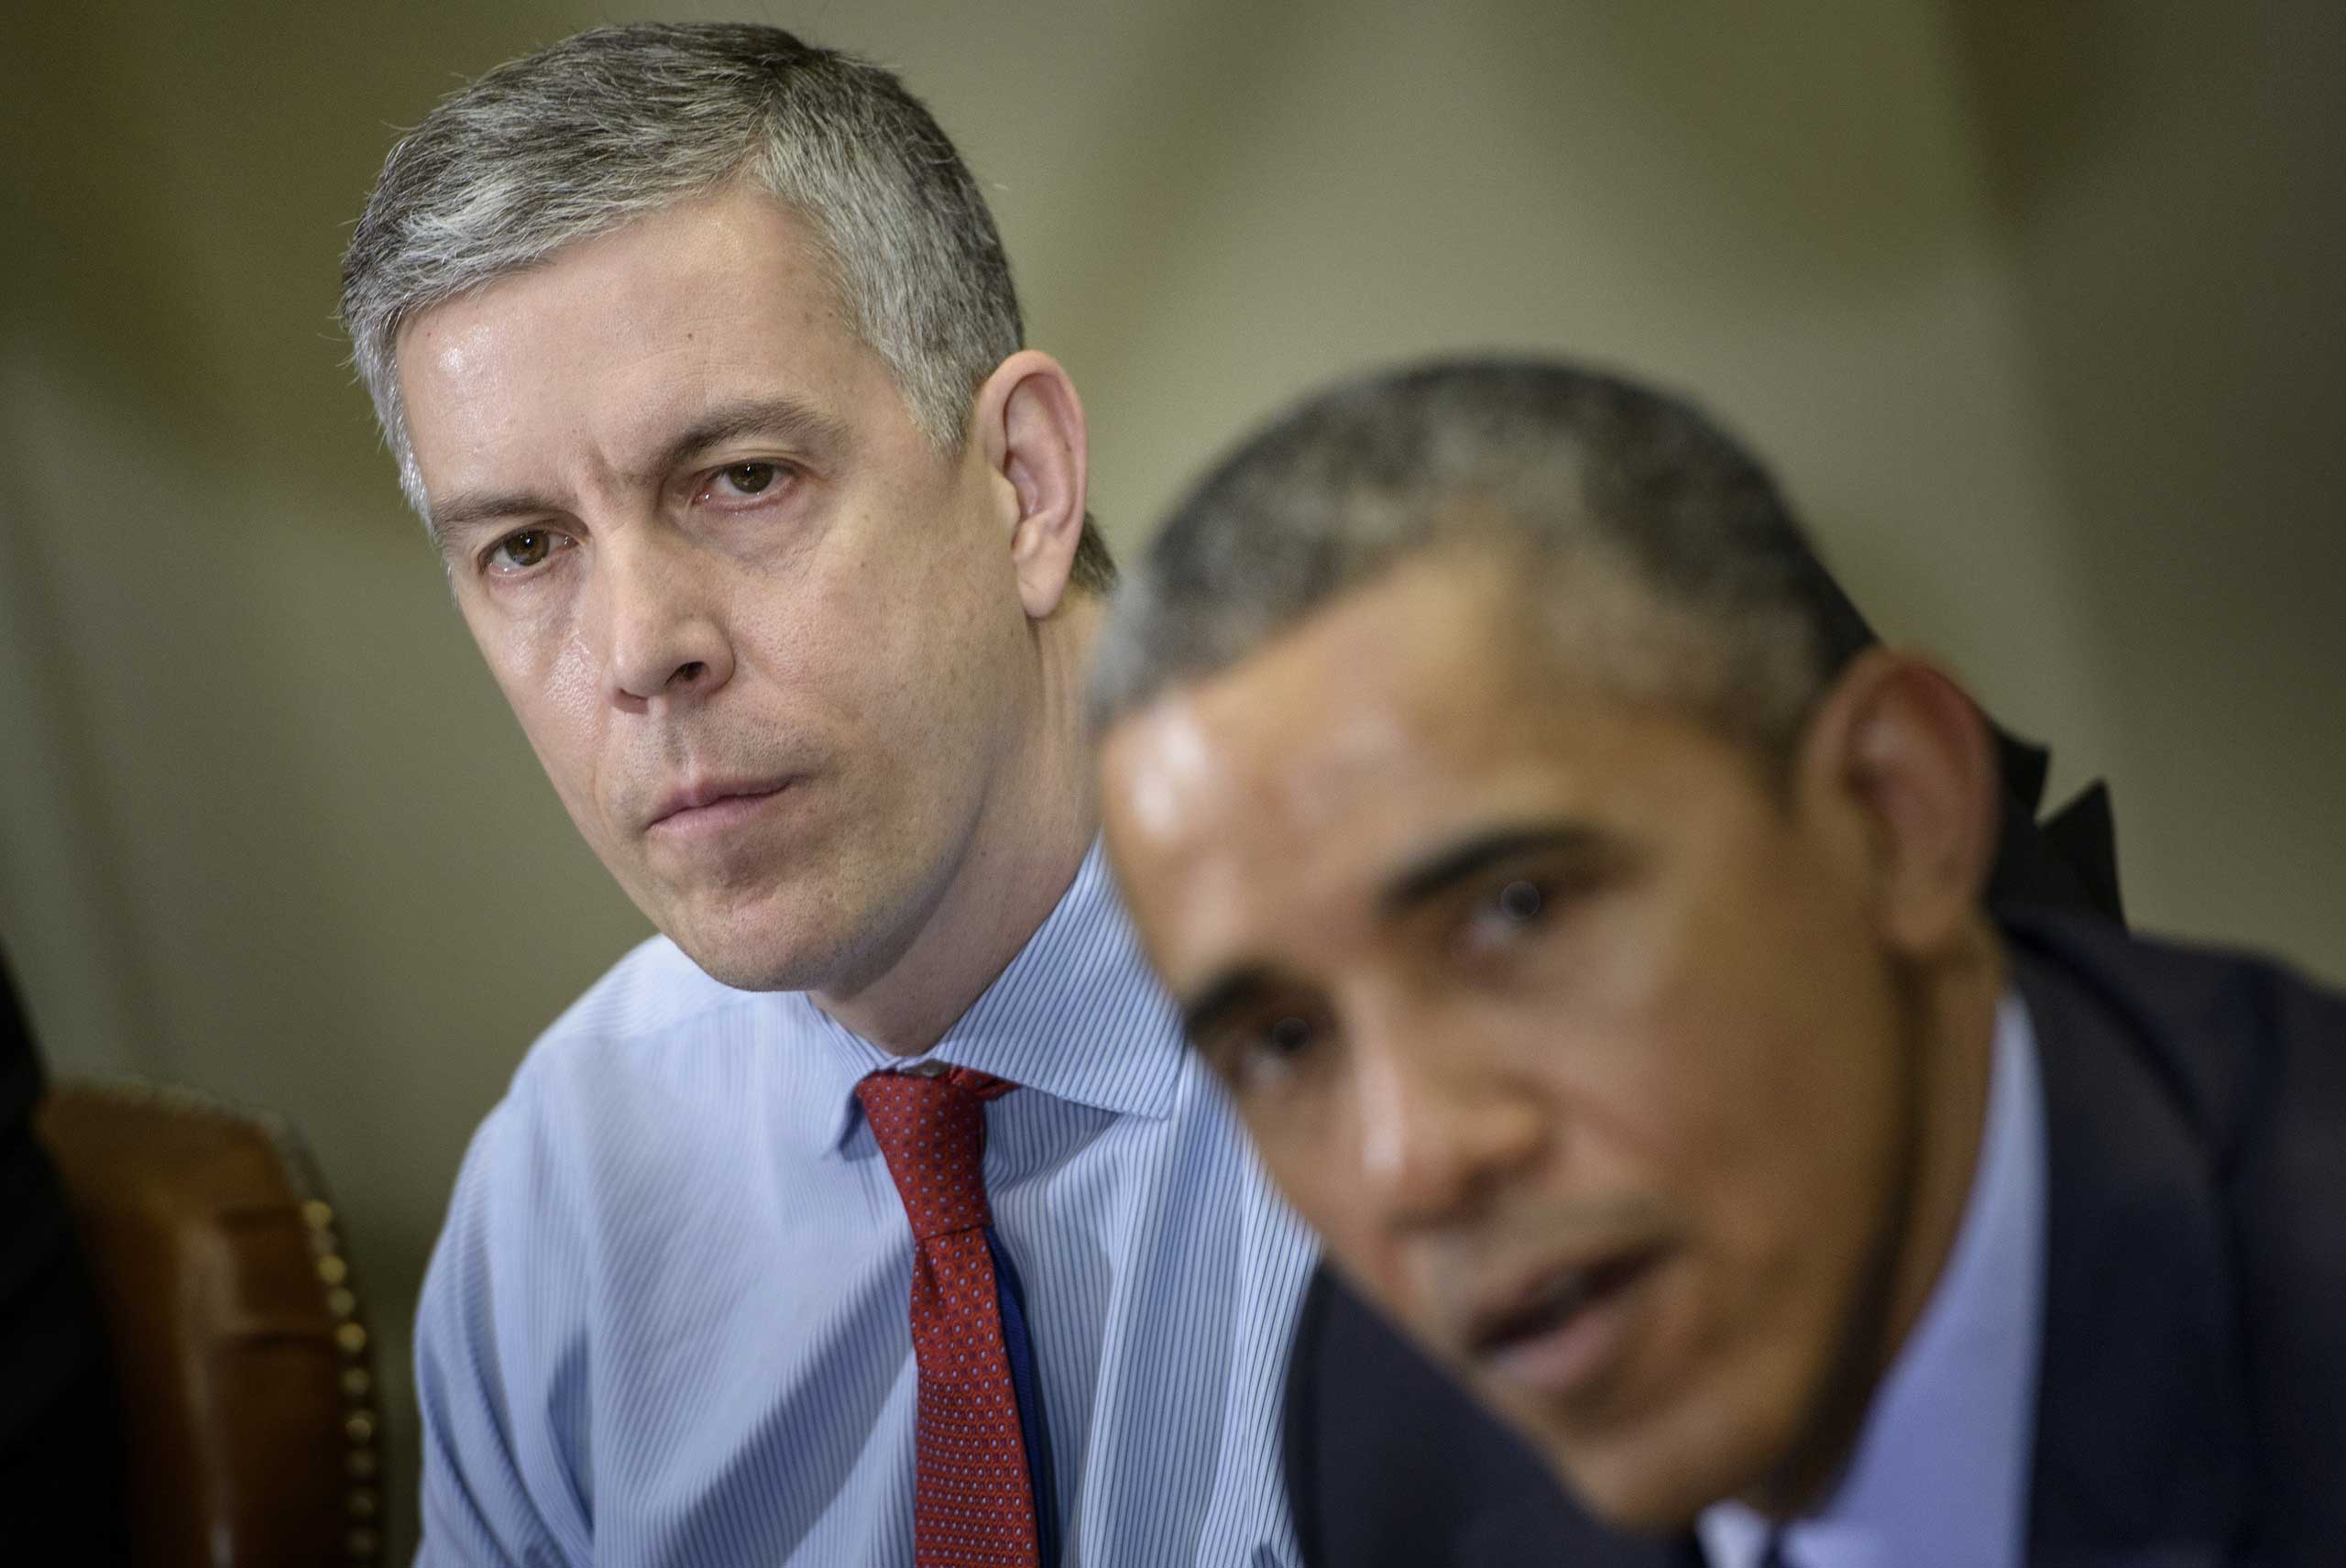 Secretary of Education Arne Duncan with President Obama at the White House, in March 2015. (Brendan Smialowski—AFP/Getty Images)